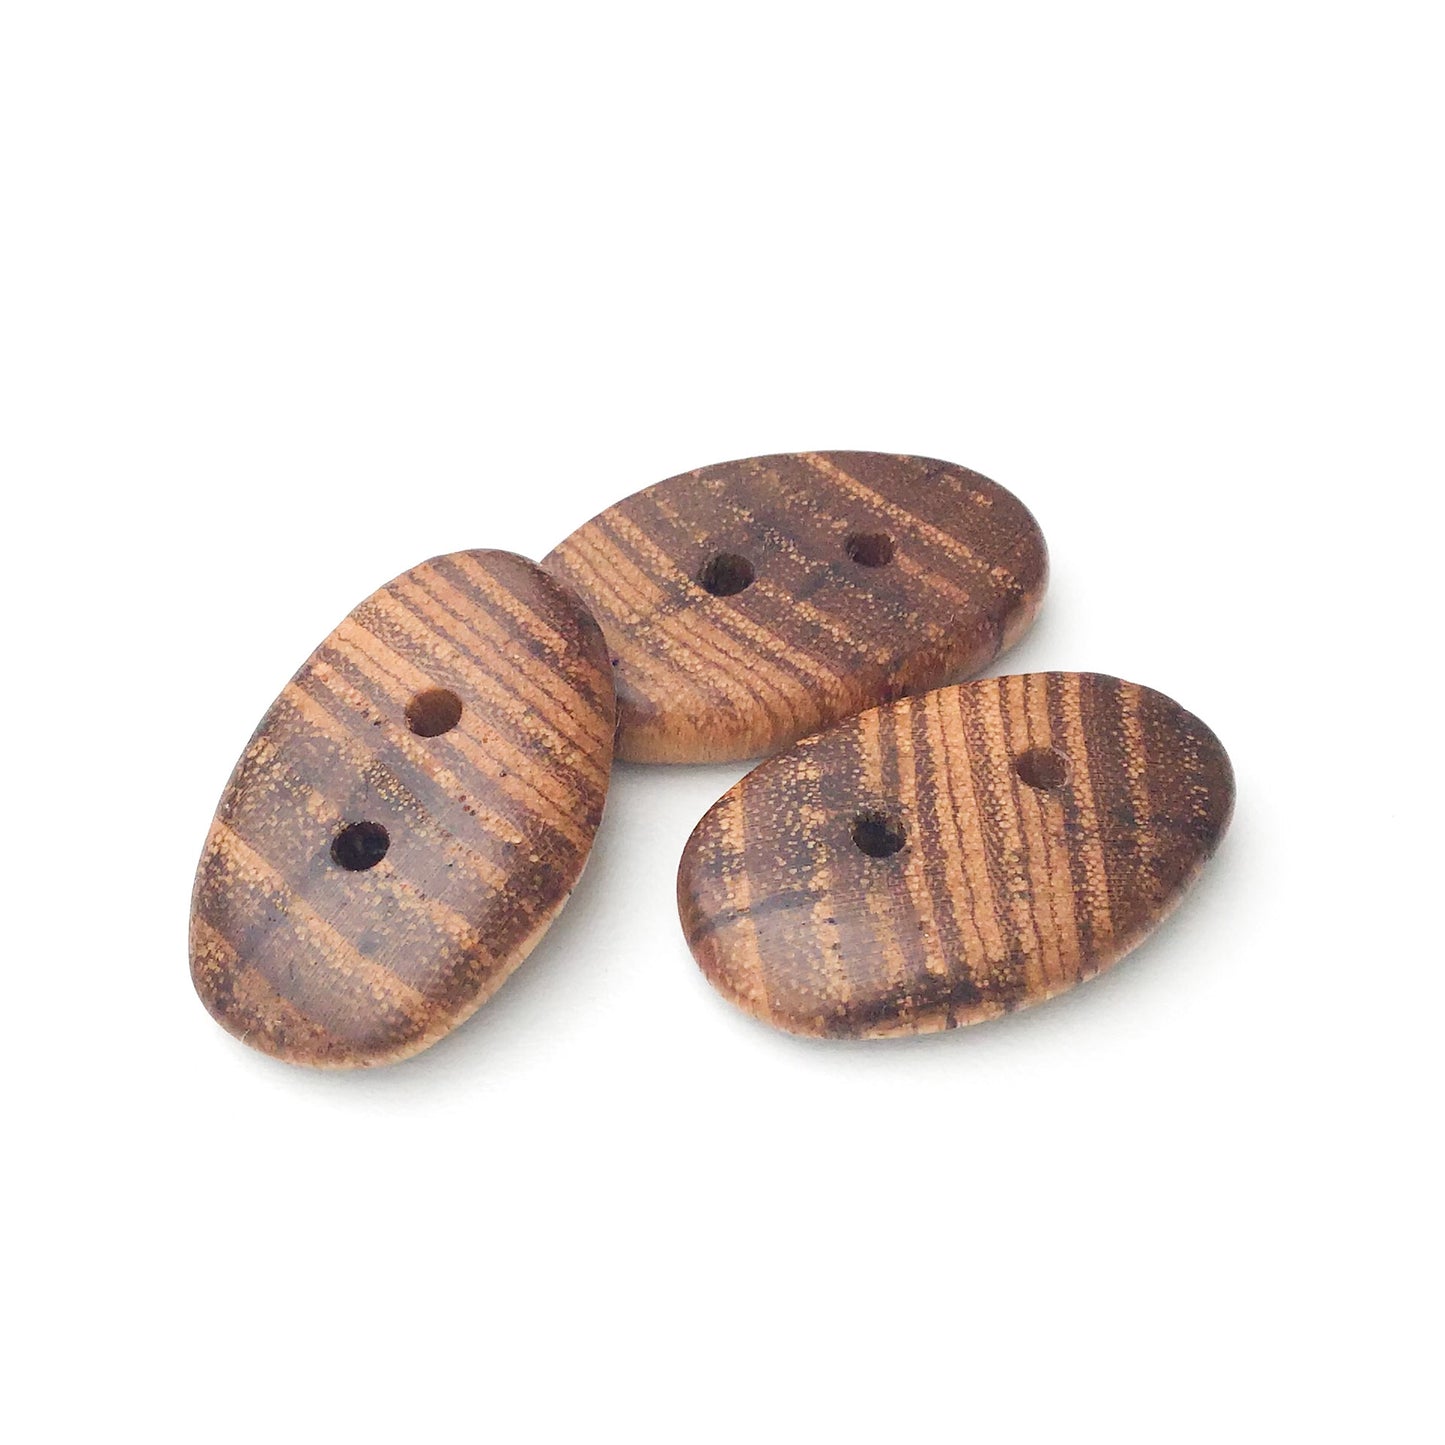 Black Locust Wood Buttons - Oval Wood Toggle Style Buttons - 3/4" x 1 3/16" - 3 Pack